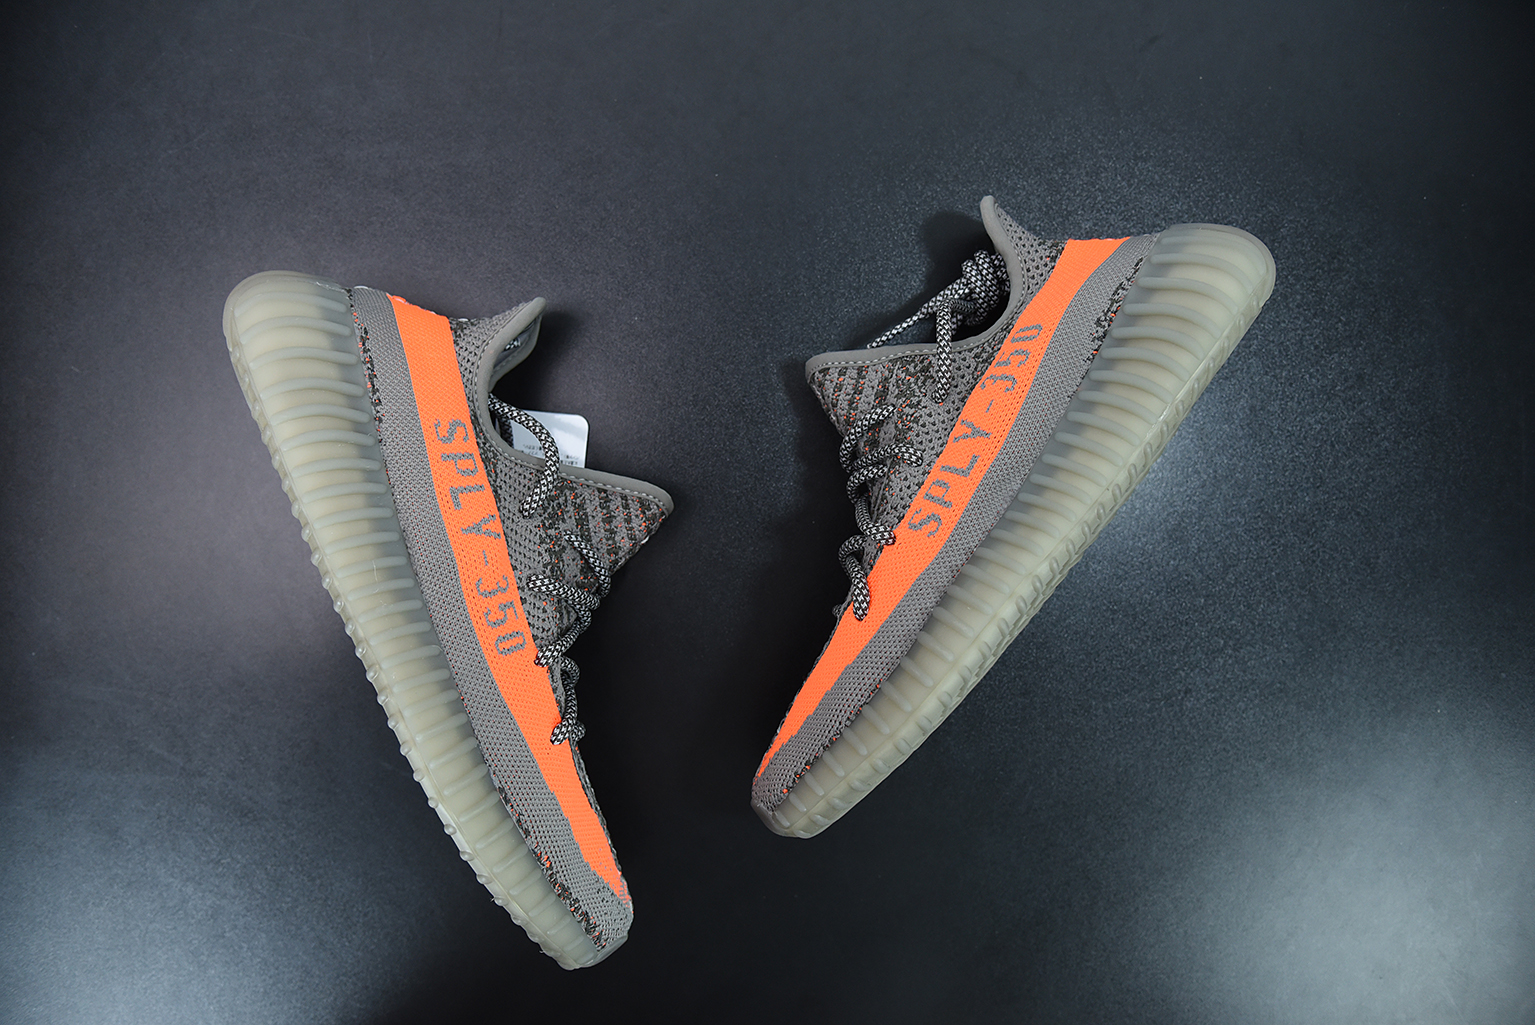 adidas Yeezy Boost 350 “Beluga Reflective” Sale – Fit Sporting Goods